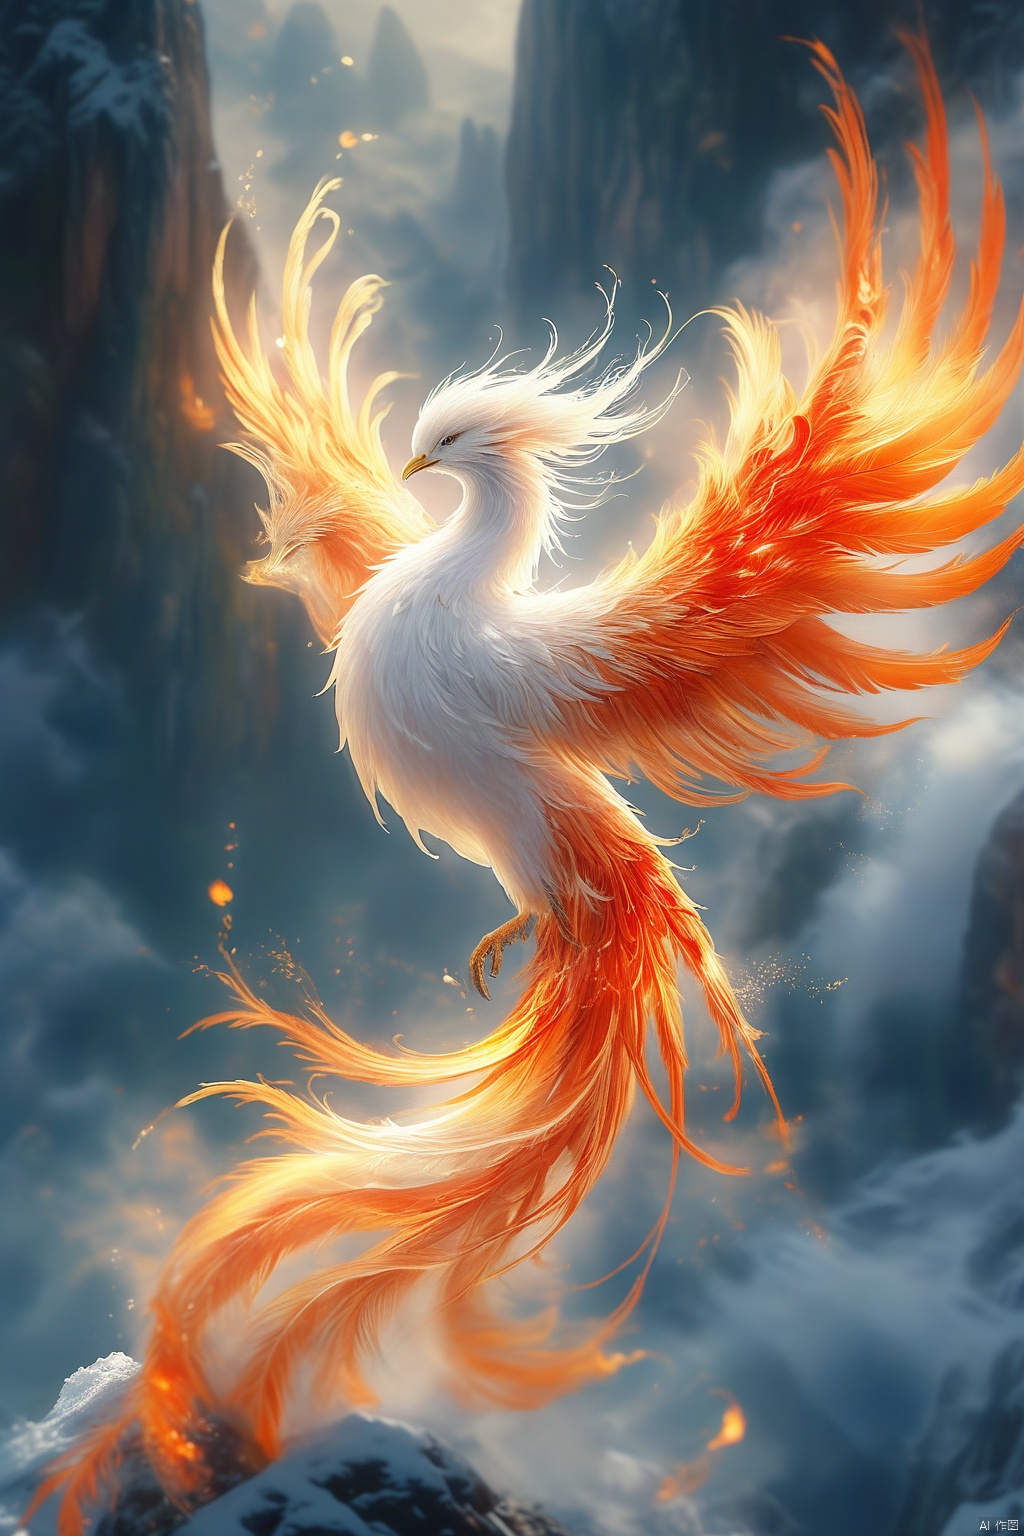  A phoenix formed by ice water, with slender tail feathers fluttering in the wind. Mist covers part of the phoenix's body, and the background is a snowy mountain, Chinese ancientpaintings, glow